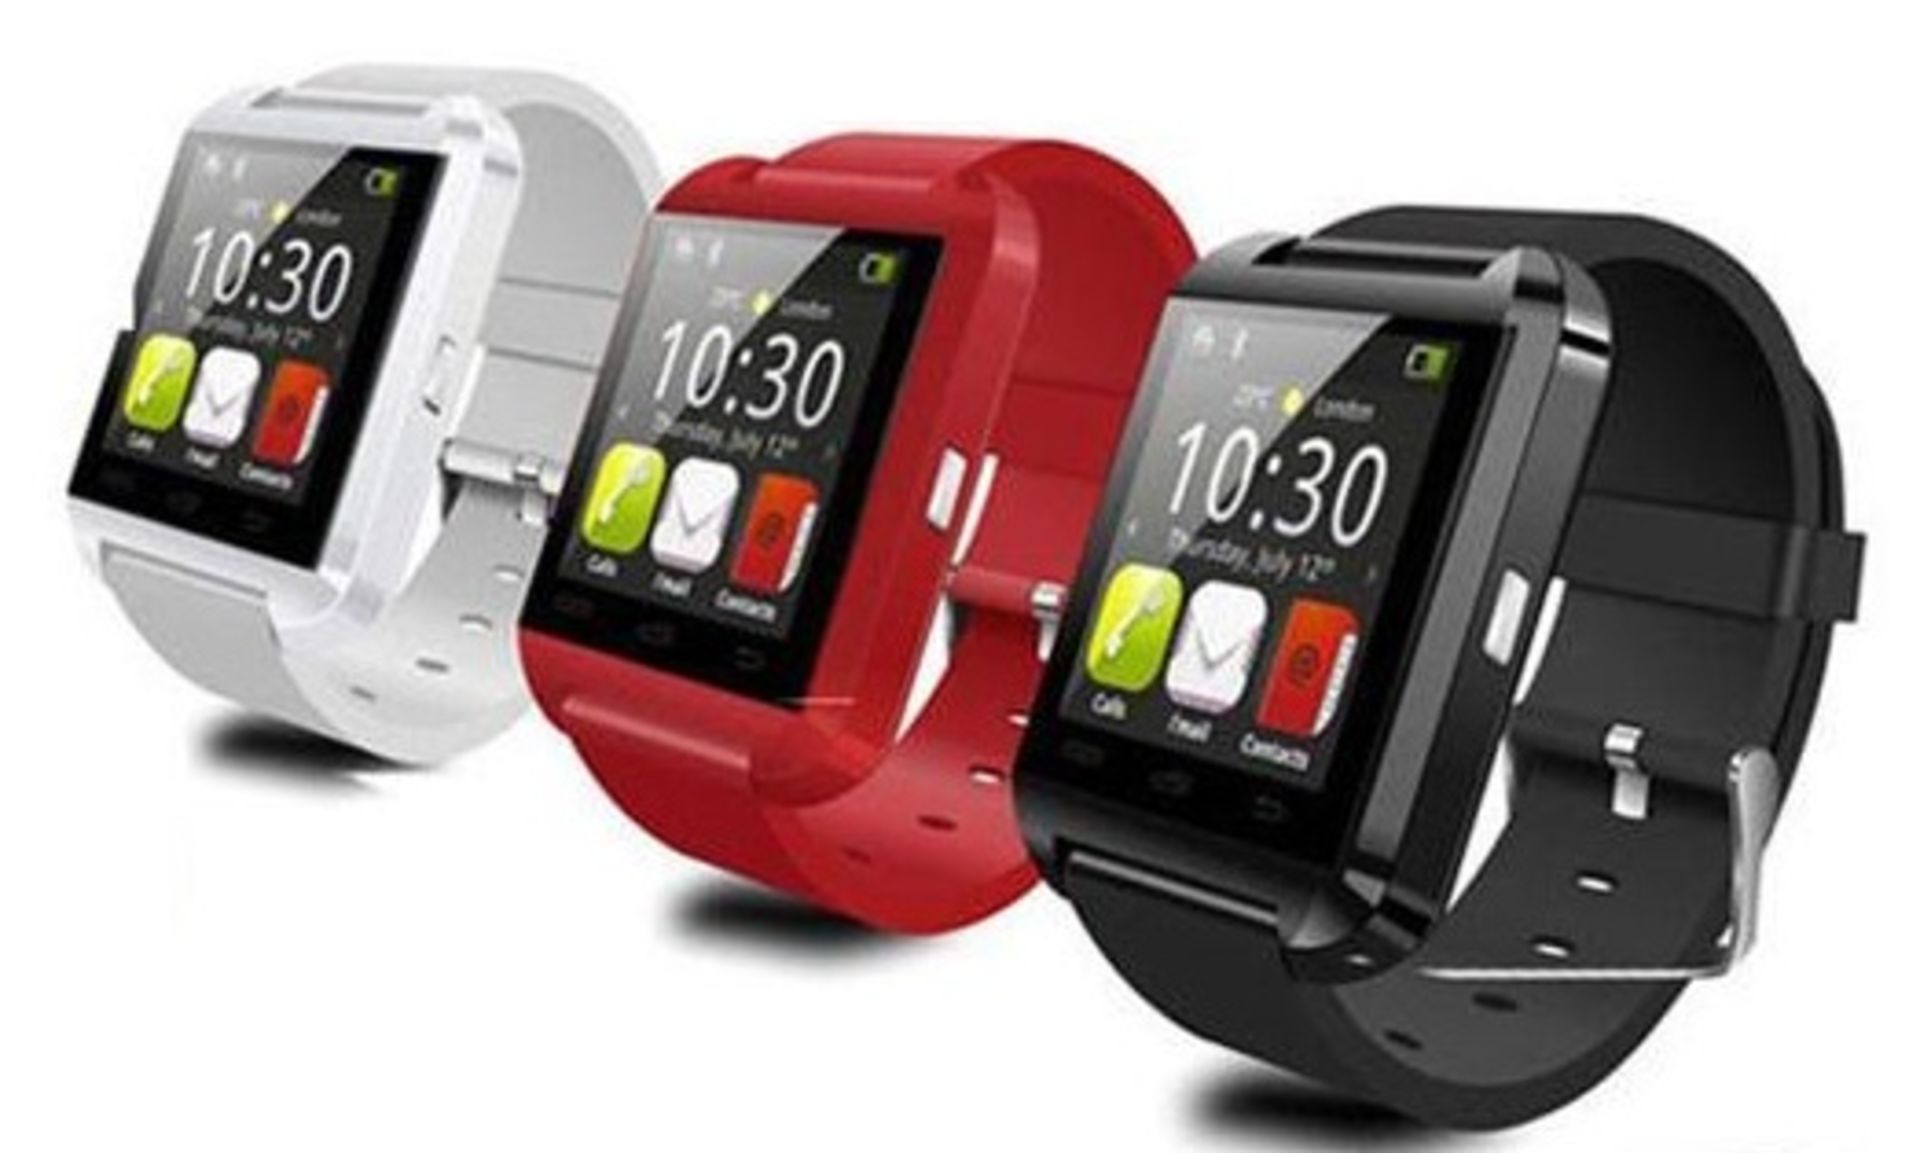 Grade A Boxed Bluetooth Smart Watch With Touchscreen - Can Talk/Recieve Phone Calls and Text